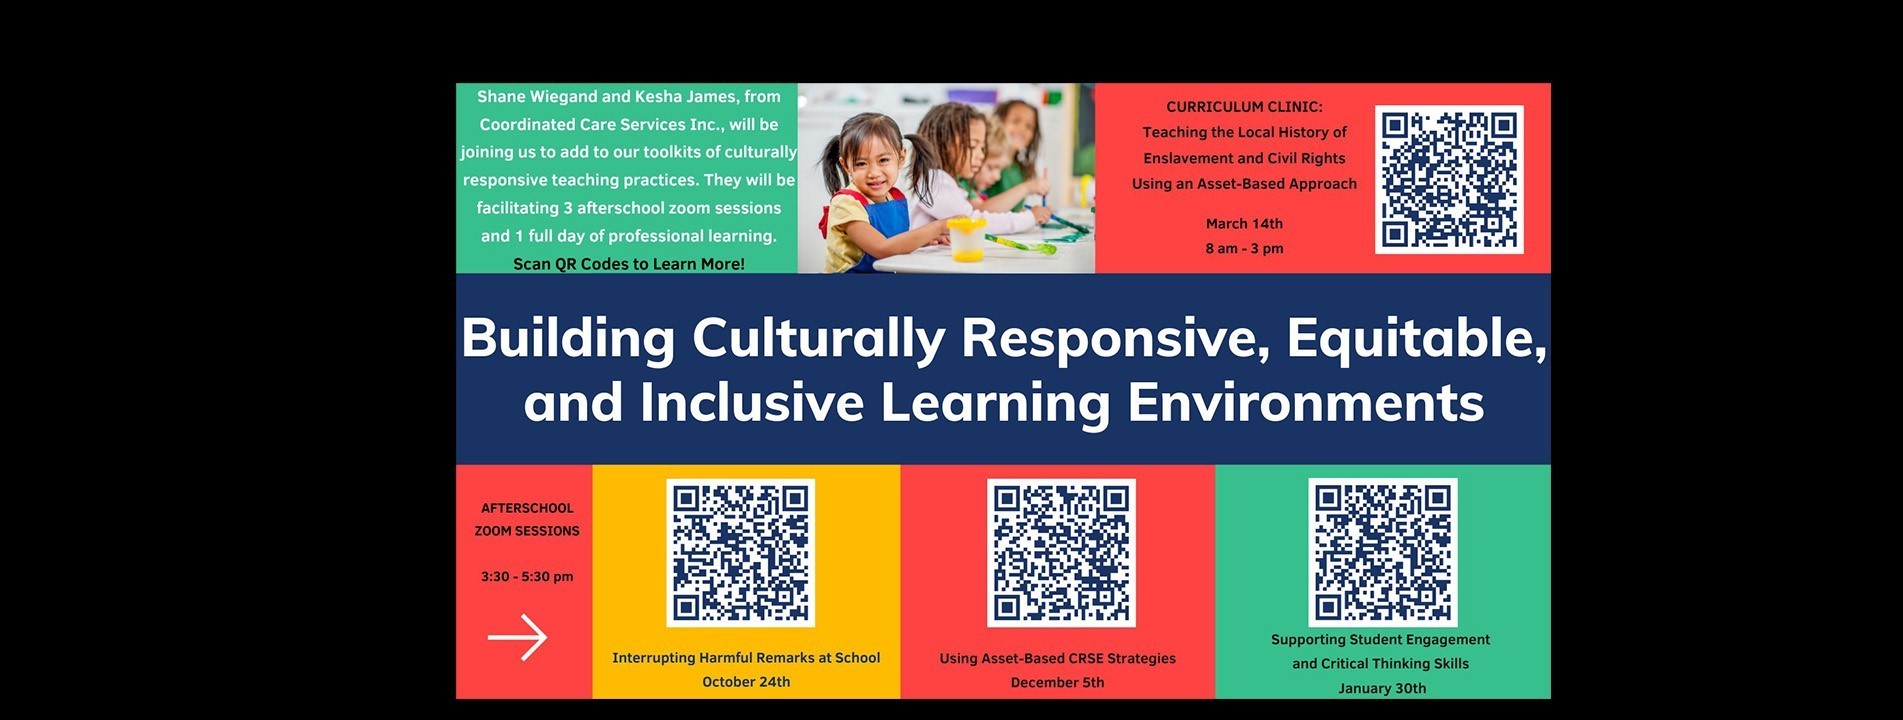 Building Culturally Responsive, Equitable, and Inclusive Learning Environments. Shane Wiegand and Kesha James, from Coordinated Care Services, Inc, will be joining us to add to our toolkits of culturally responsive practices. They will be facilitating 3 afterschool zoom sessions, and 1 full day of professional learning. Curriculum Clinic: Teaching the Local History of Enslavement and Civil Rights Using an Asset-Based Approach on March 14, 2024 from 8 am - 3 pm; Afterschool Zoom Sessions from 3:30 - 5:30 pm: Interrupting Harmful Remarks at School on October 24, 2023; Using Asset-Based CRSE Strategies on December 5, 2023, and Supporting Student Engagement and Critical Thinking Skills on January 30th.